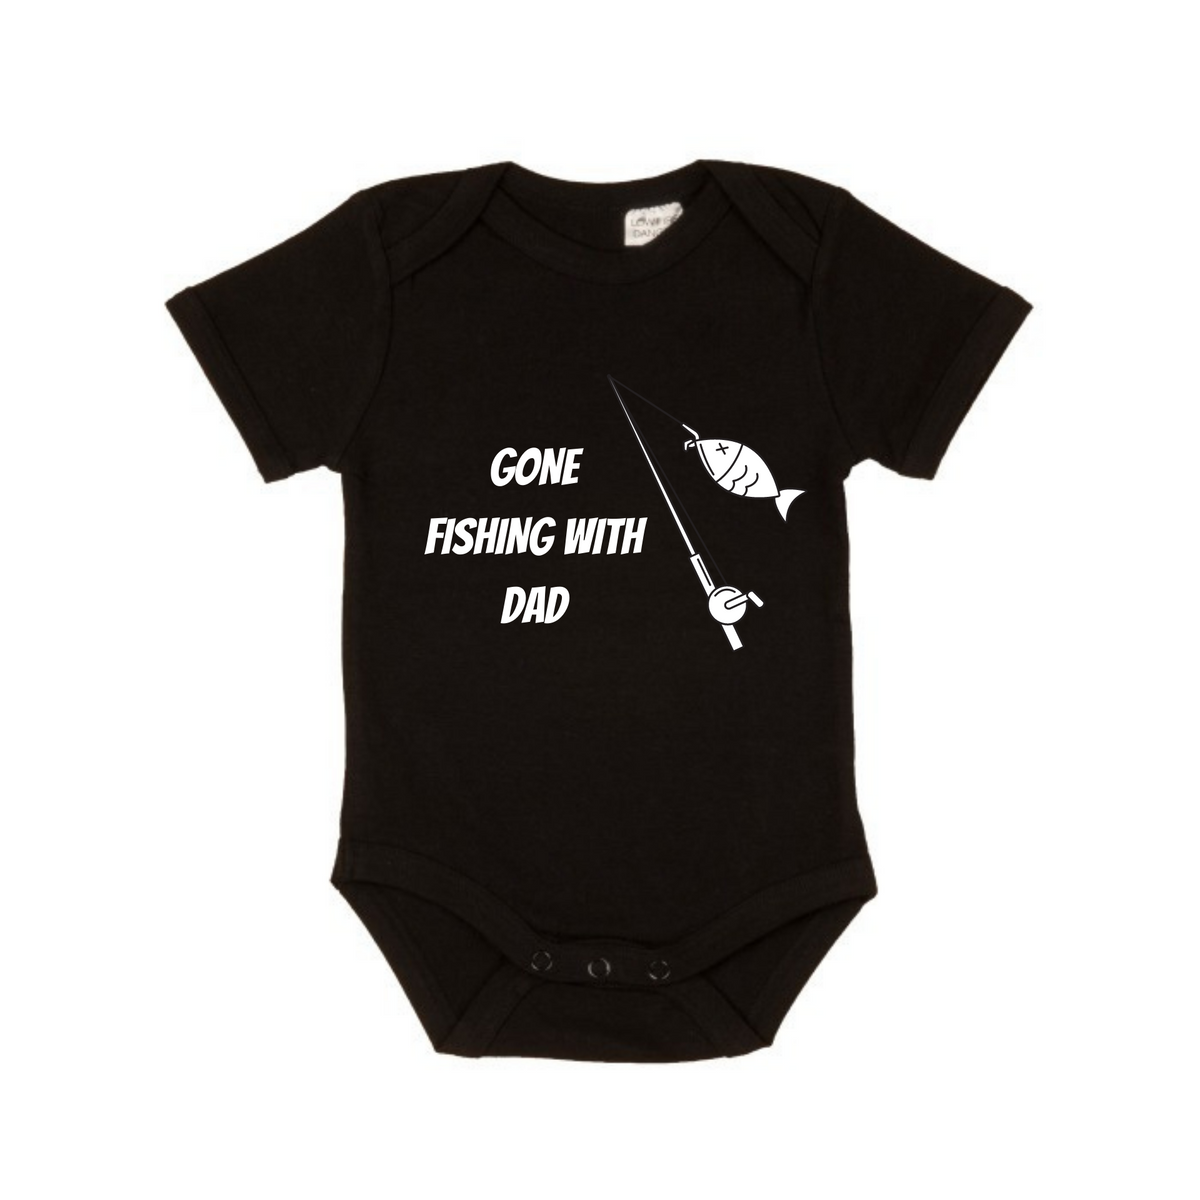 MLW By Design - Gone Fishing with Dad Bodysuit Black (CLEARANCE)